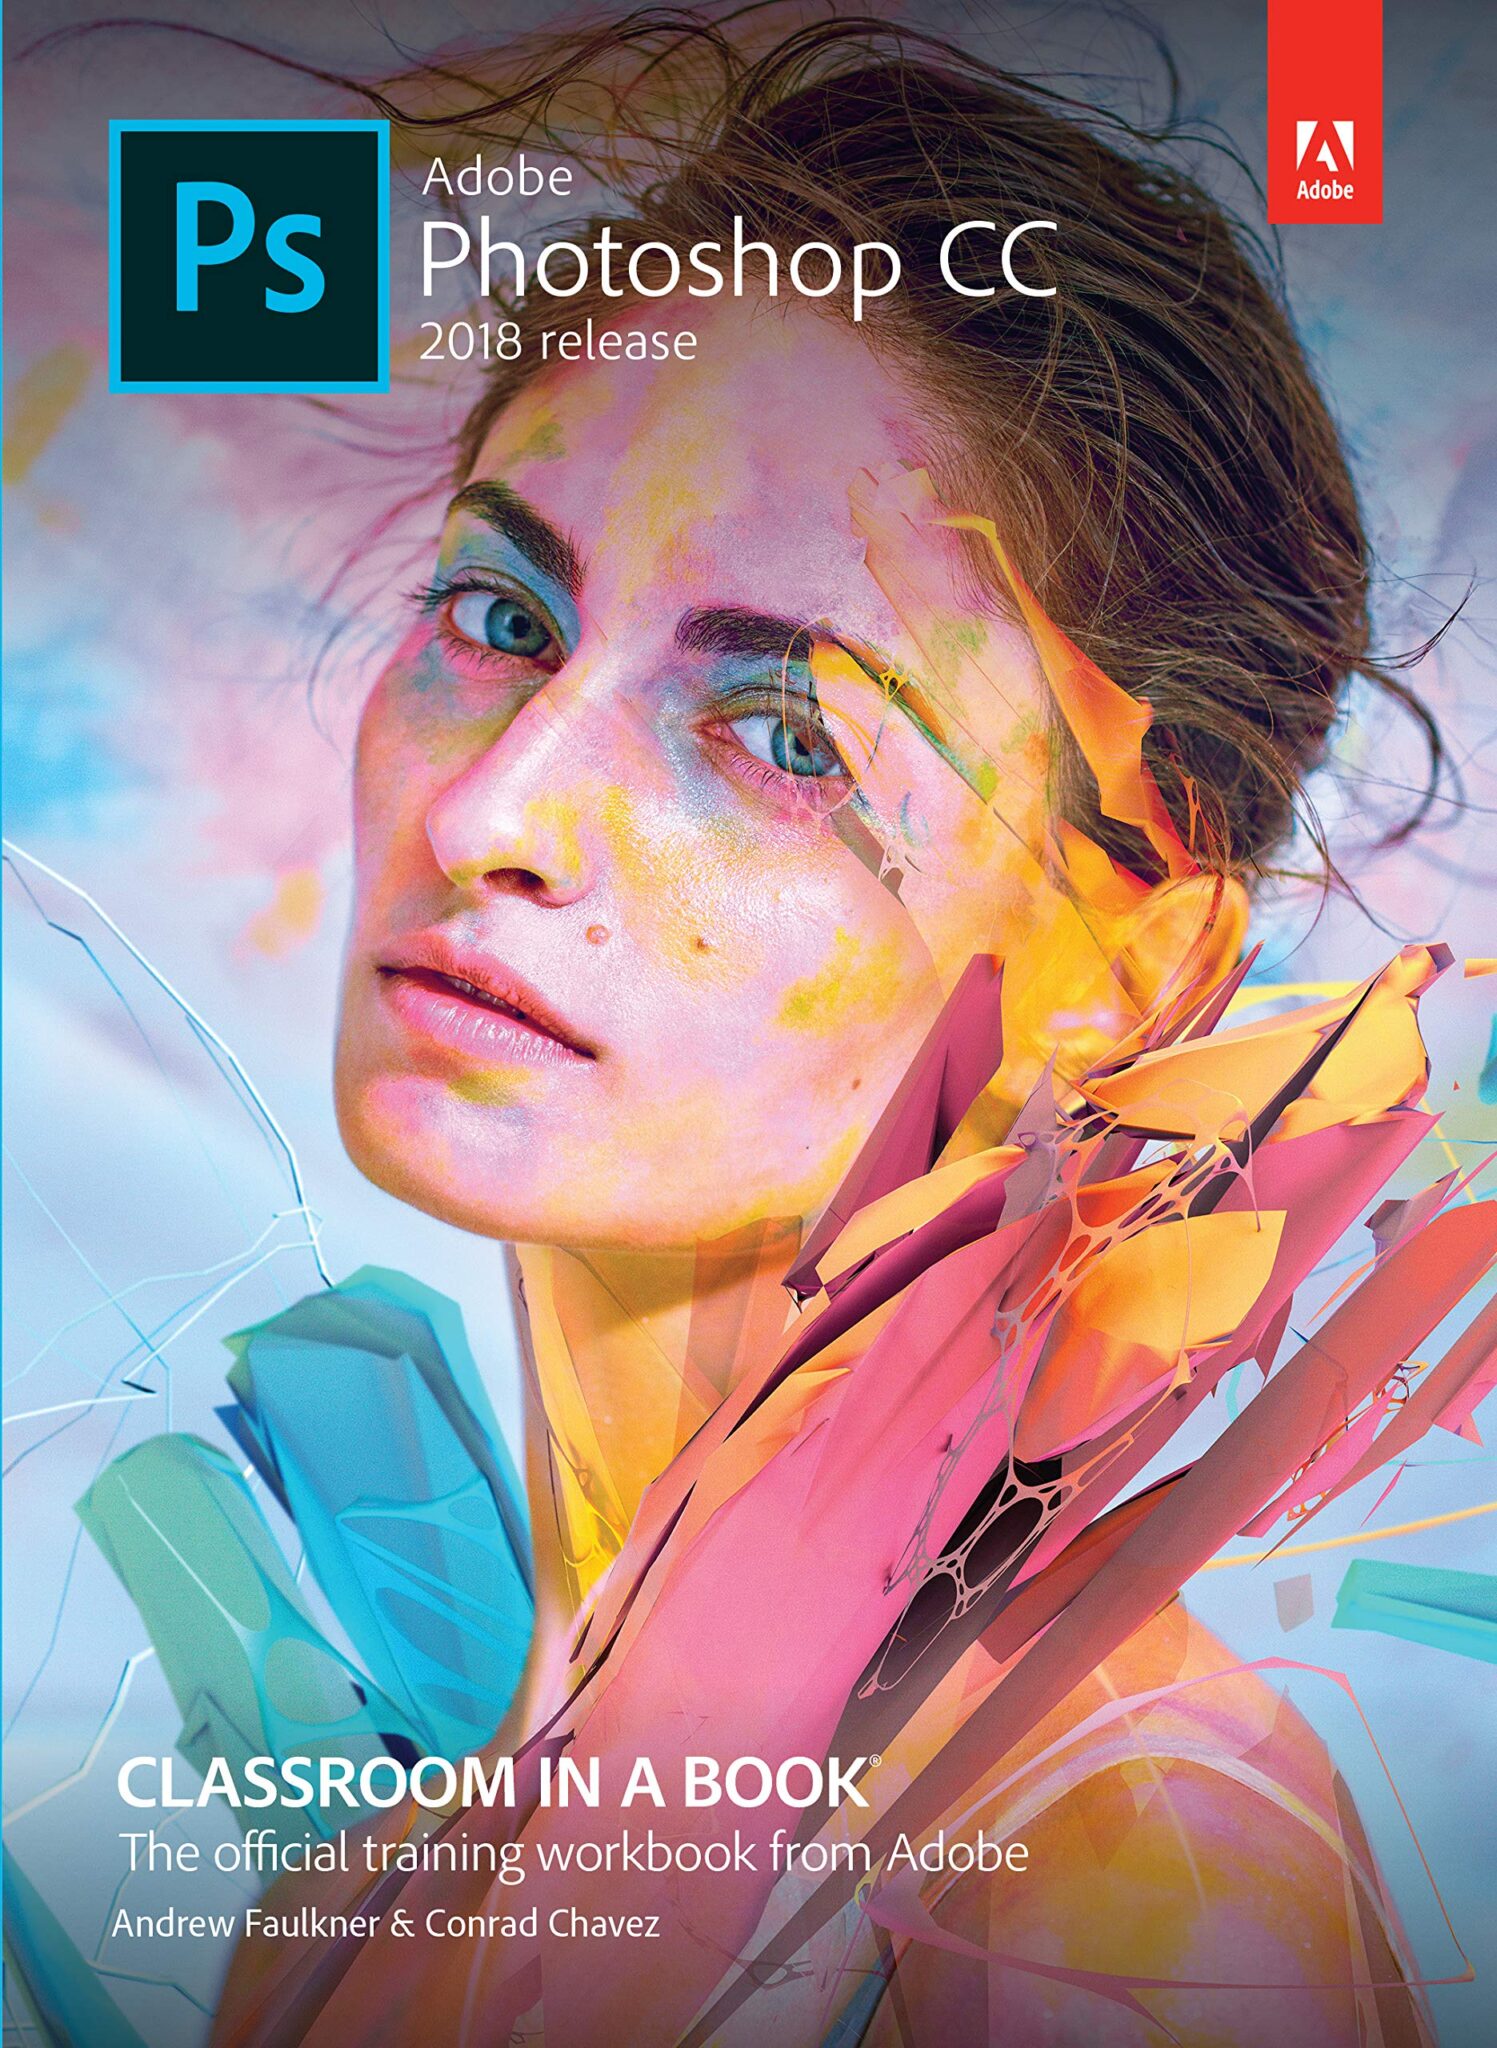 adobe photoshop book pdf free download in tamil